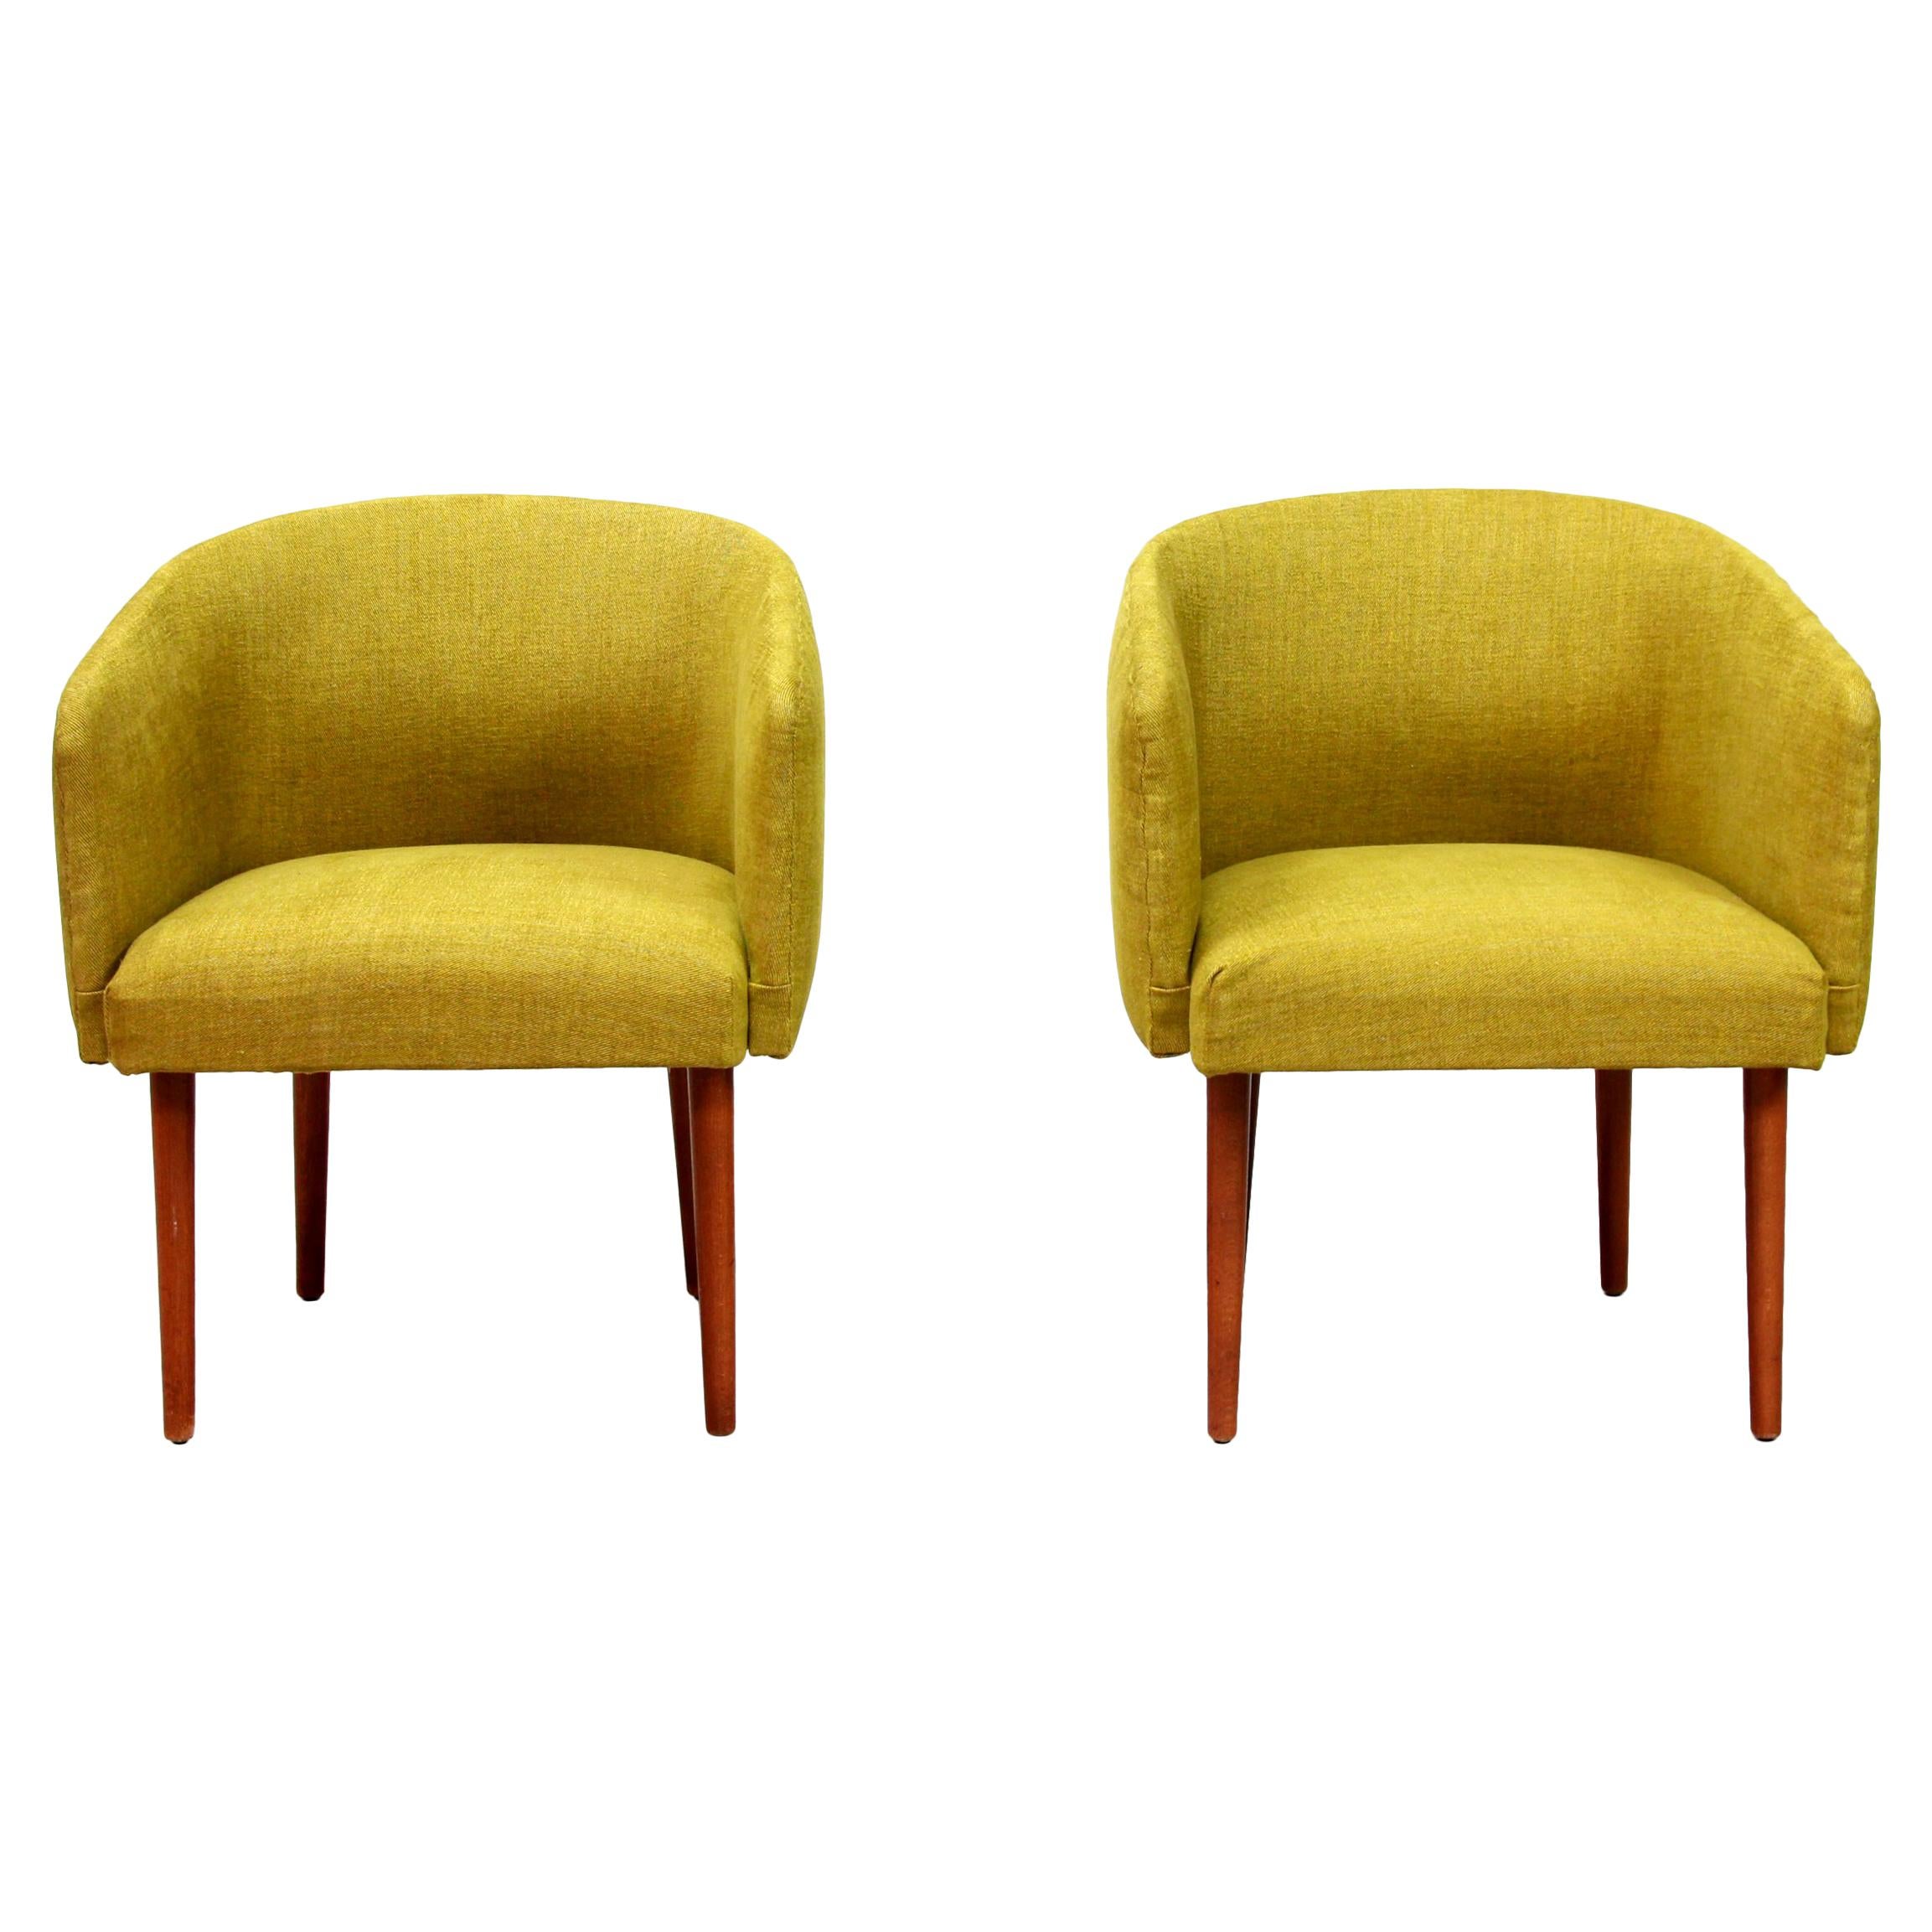 Set of Two Yellow Mid-Century Modern Club Chairs